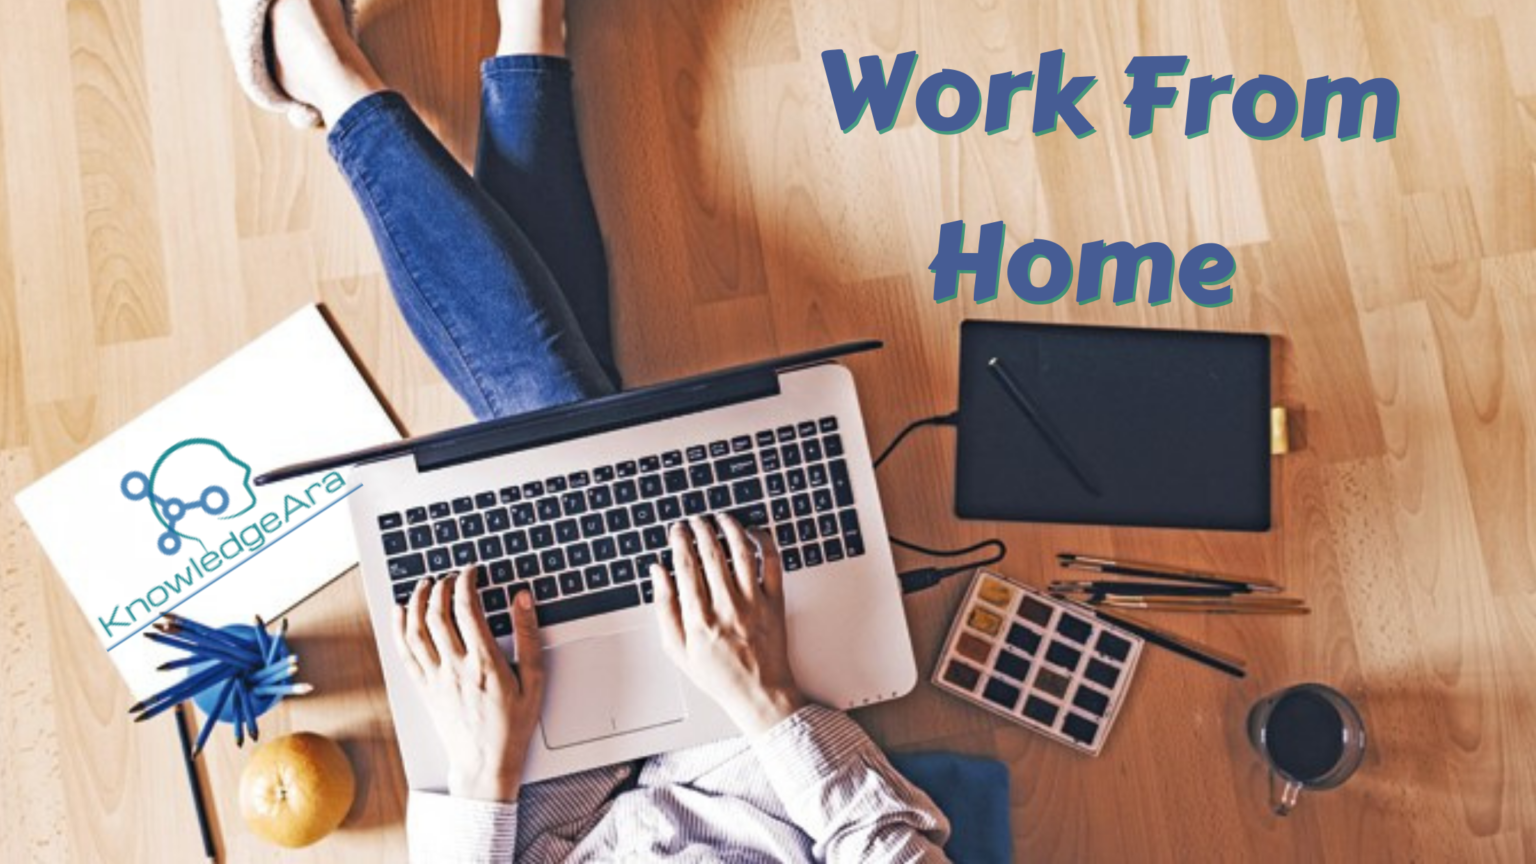 Work form home